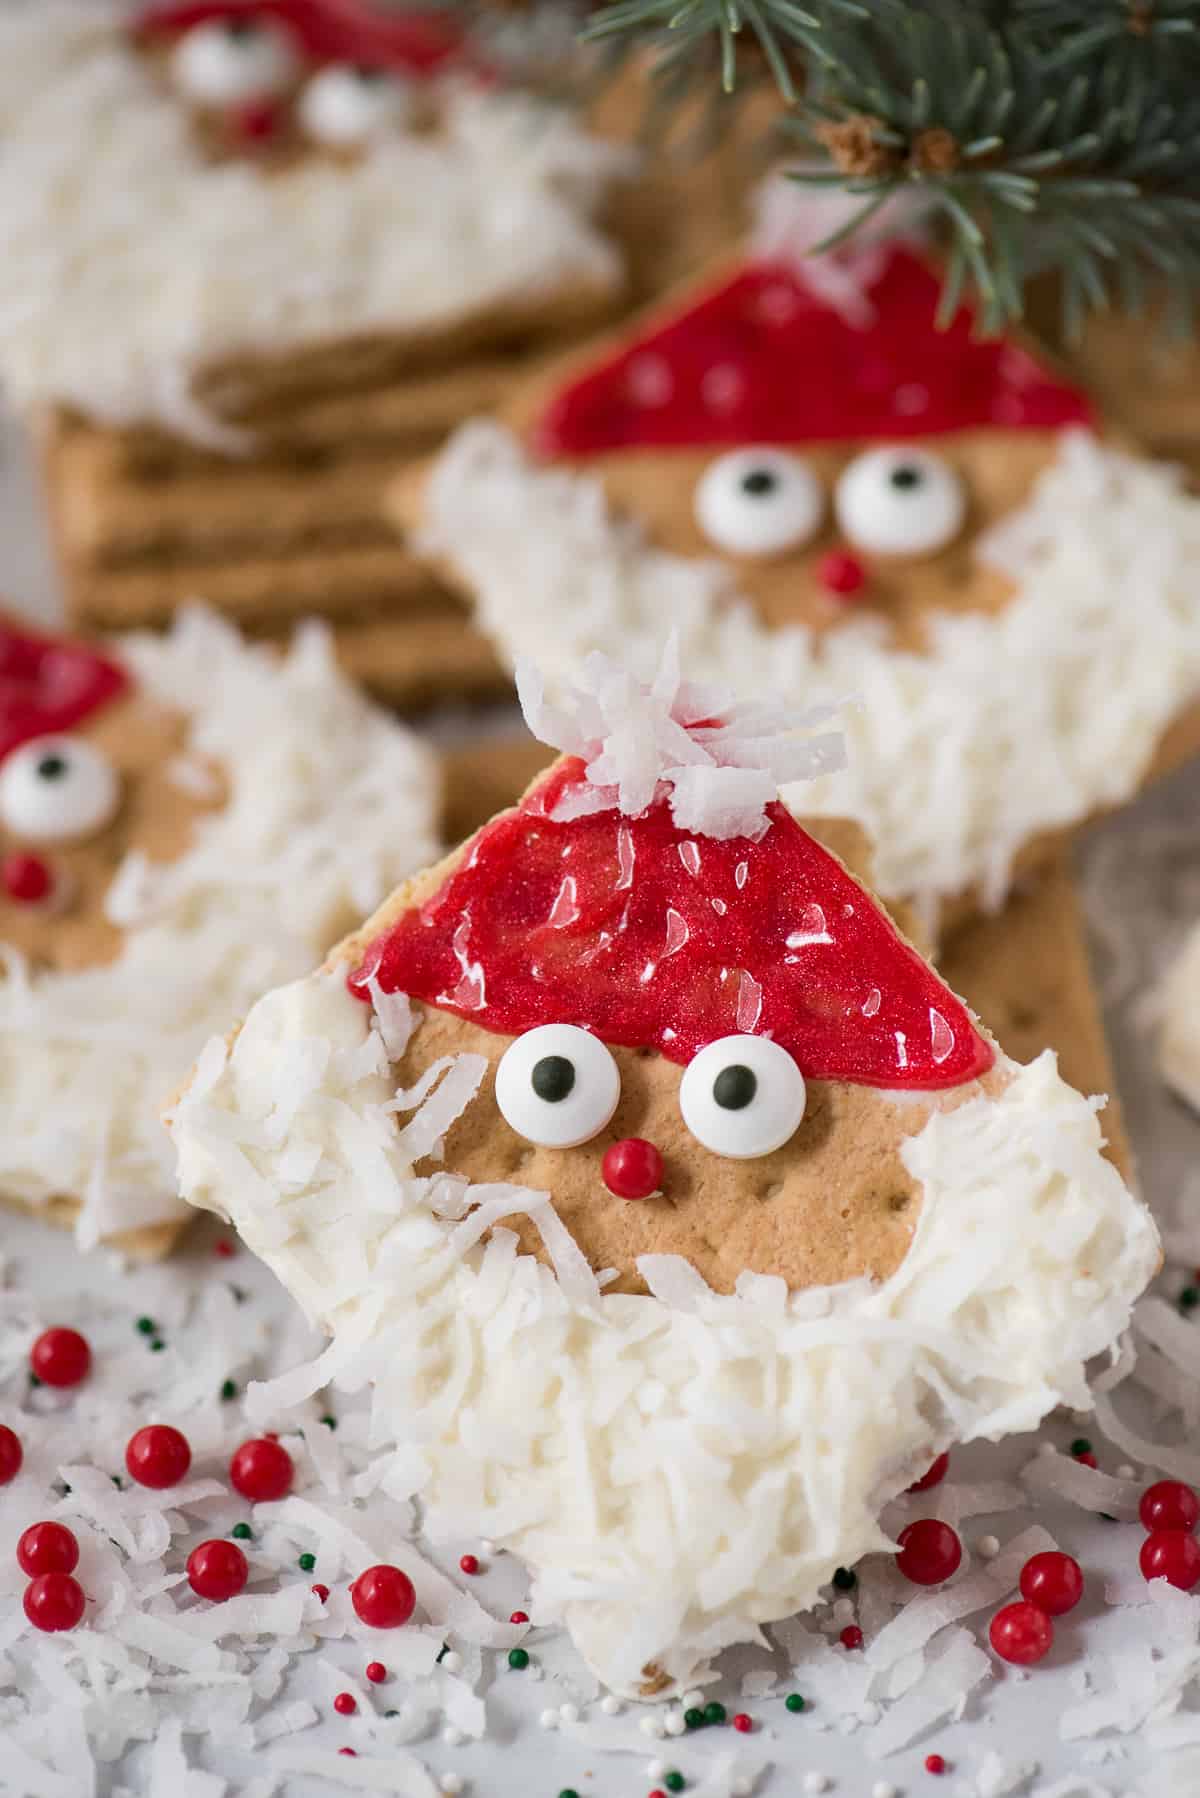 graham cracker squares decorated with frosting to look like Santa